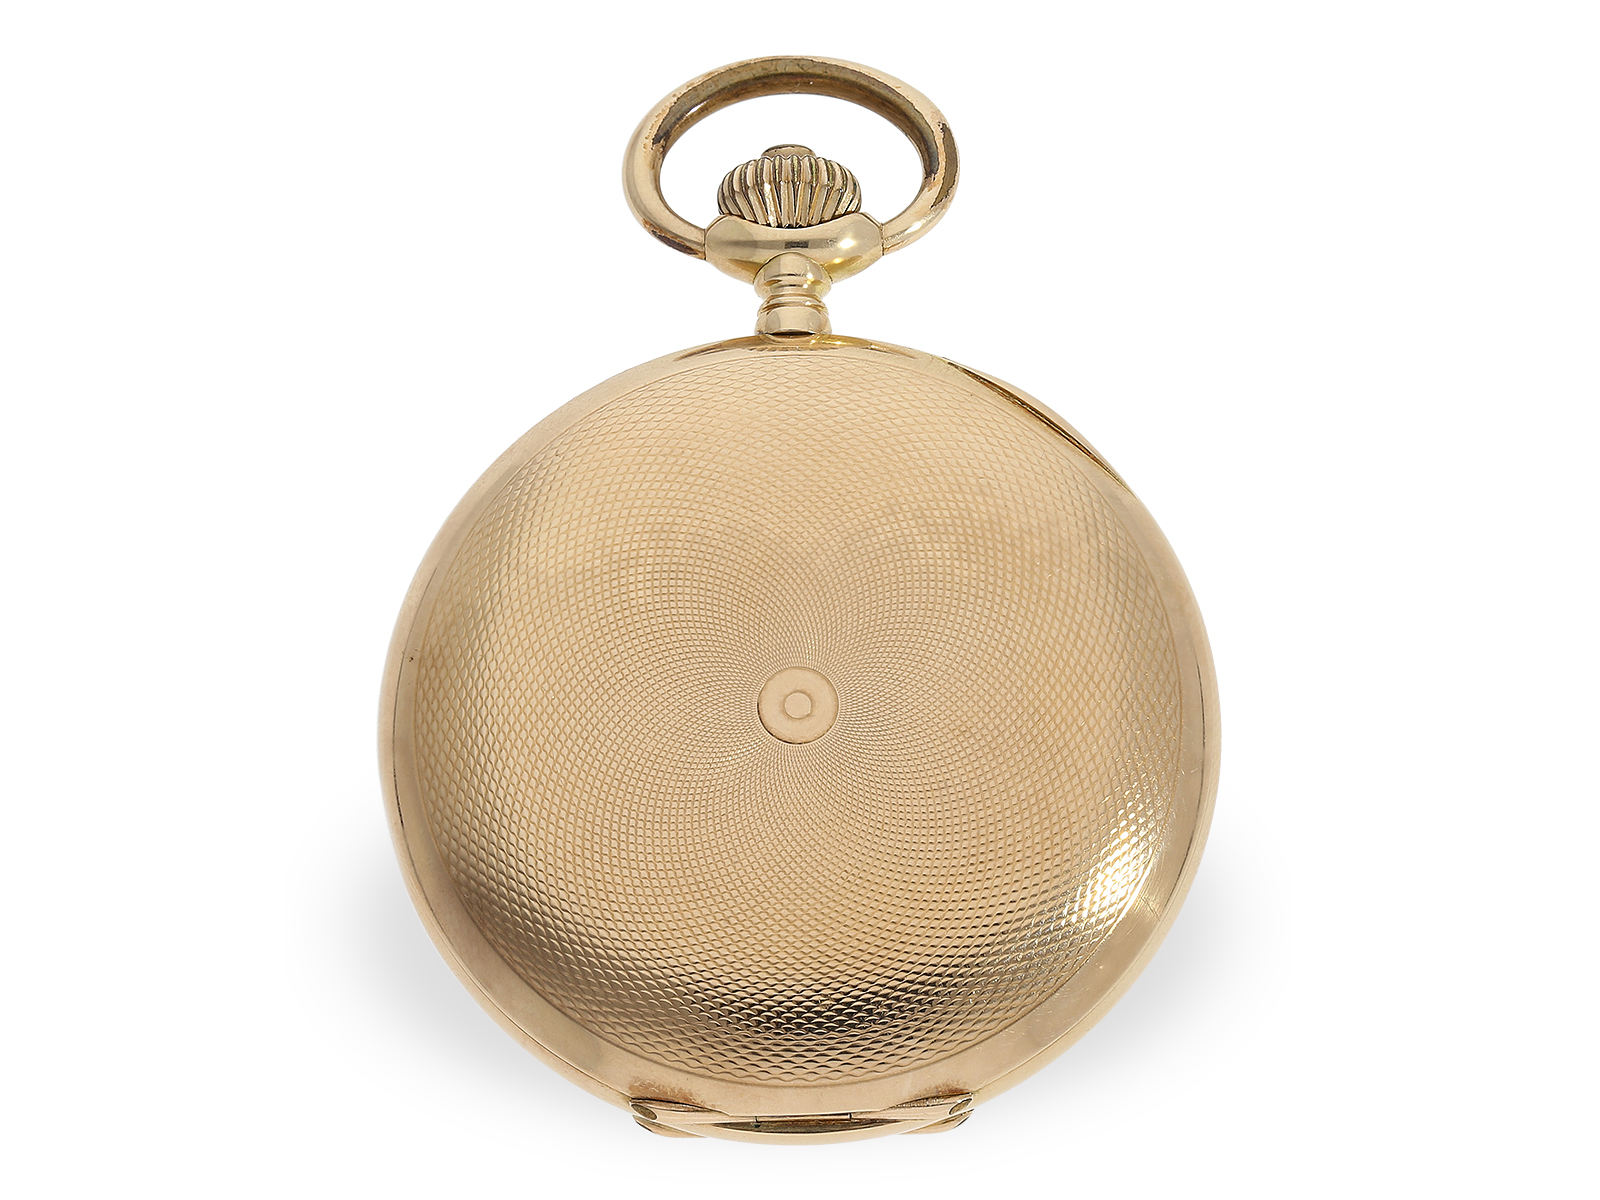 Pocket watch: fine gold hunting case watch, signed Girard Perregaux No. 429106, ca. 1910 - Image 7 of 7